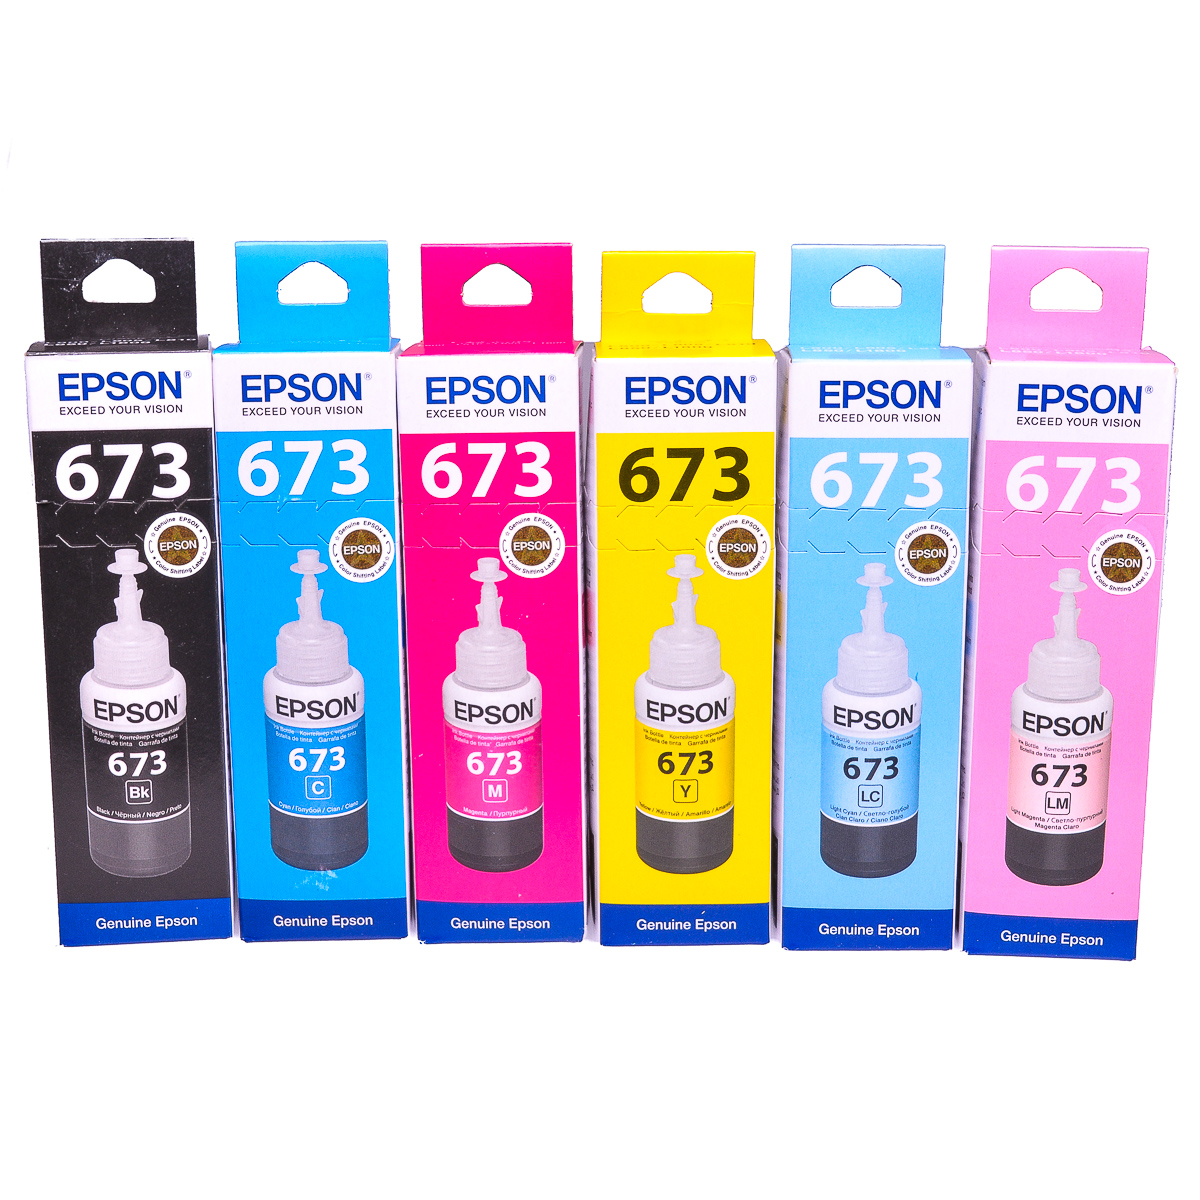 Genuine Multipack ink refill for use with Epson Stylus P50 printer